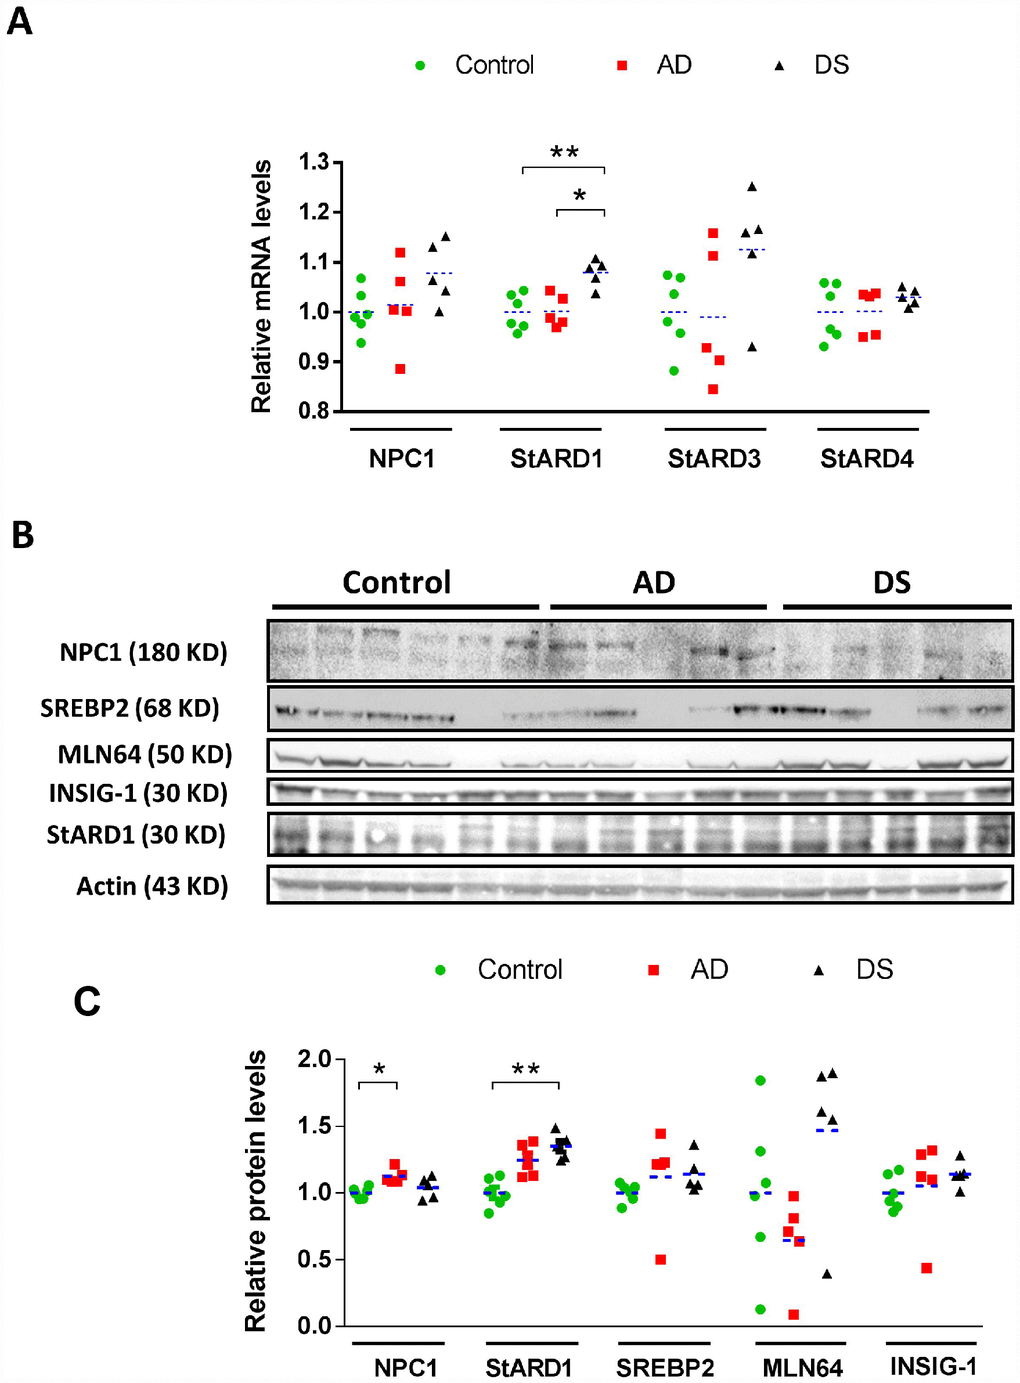 Cortical expression profile of intracellular cholesterol carriers and sensors/regulators. (A) Relative mRNA levels of NPC1, StARD3, StARD4, and StARD1 in human cortex from AD (n=5), DS (n=5), and control (n=6) subjects. Transcripts levels were normalized with respect to controls using β-actin. (*) pB) Immunoblotting of NPC1, StARD1, StARD3/MLN64, mSREBP2 and INSIG-1 of total protein extracts (90 μg/lane) from human cortex from AD (n=5), DS (n=5), and control (n=6) donors. (C) Protein levels quantified by densitometry and normalized using β-actin as housekeeping followed by normalization with control group. (*) p